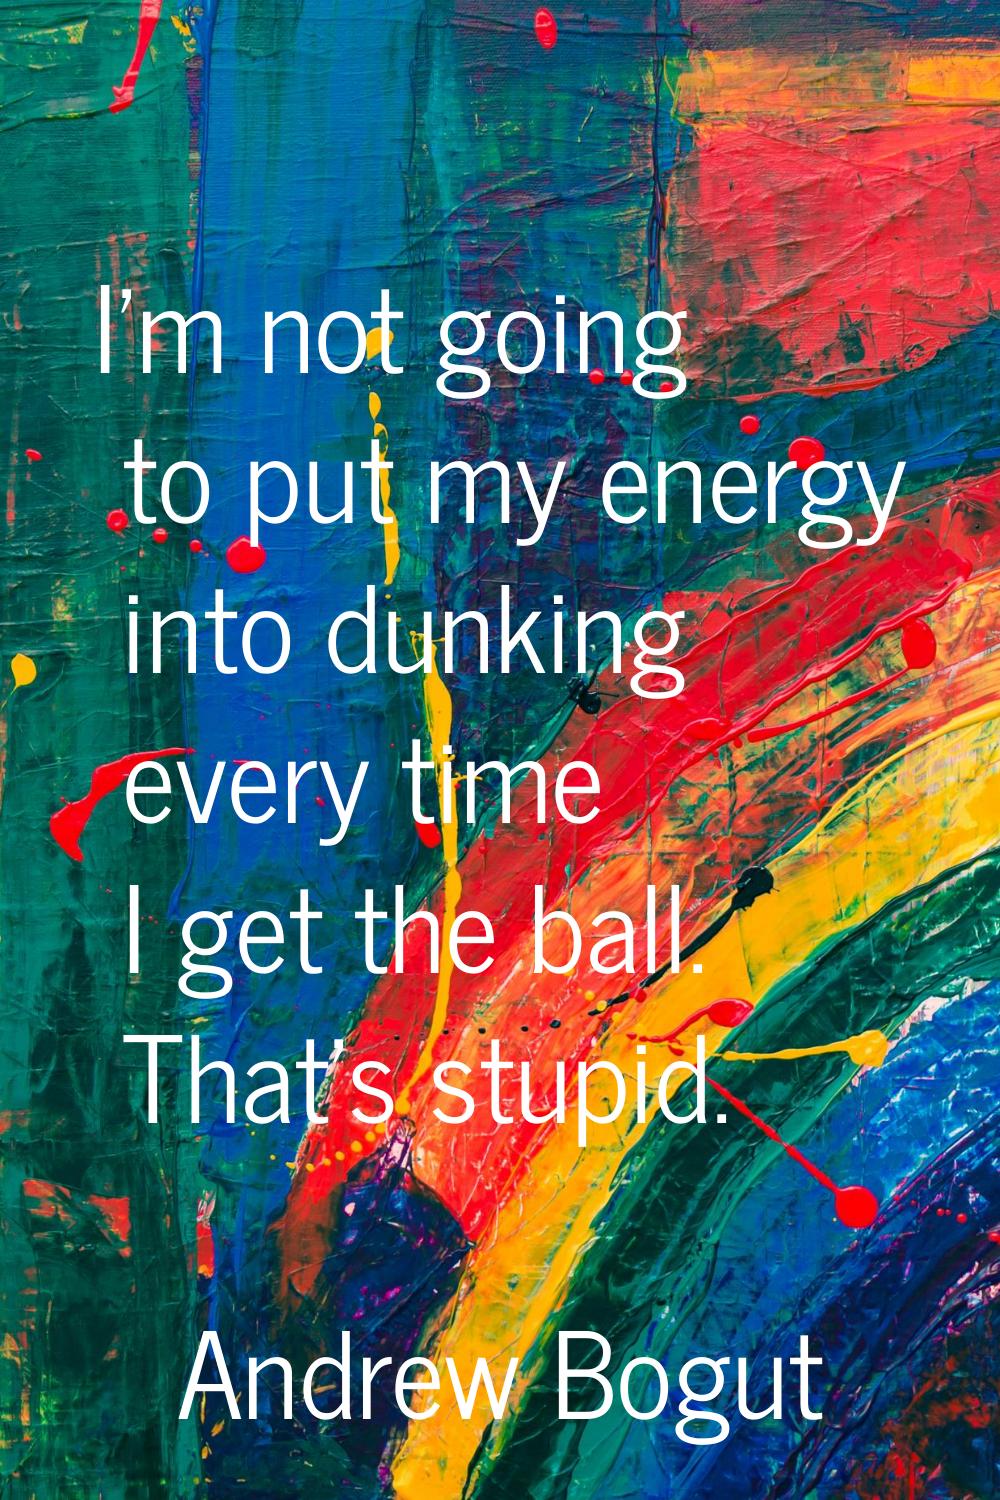 I'm not going to put my energy into dunking every time I get the ball. That's stupid.